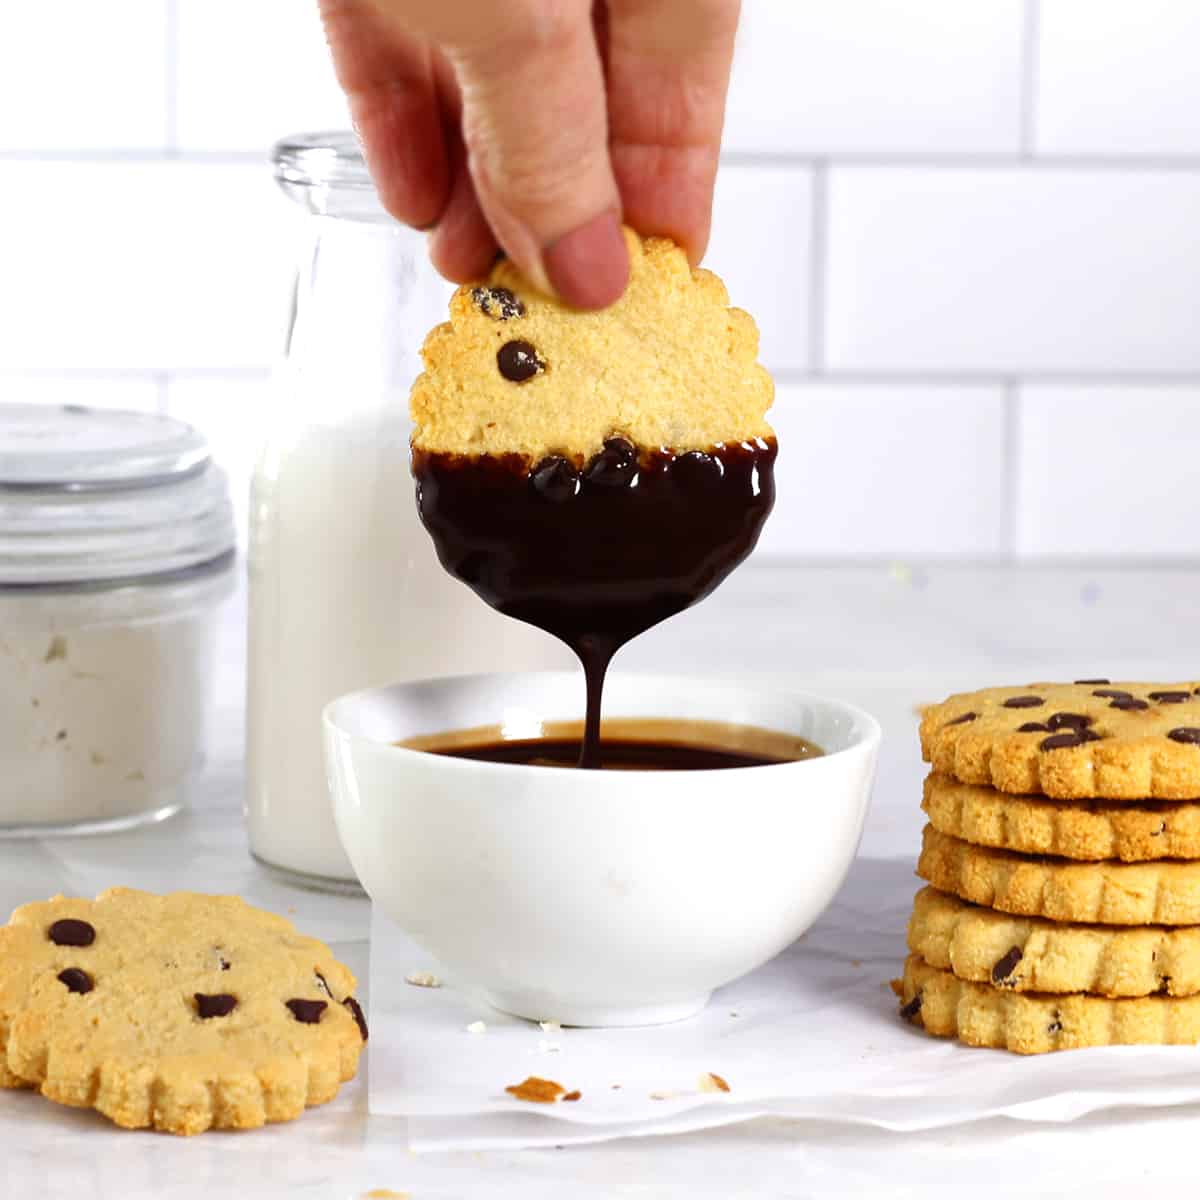 a shortbread cookies being dipped in chocolate